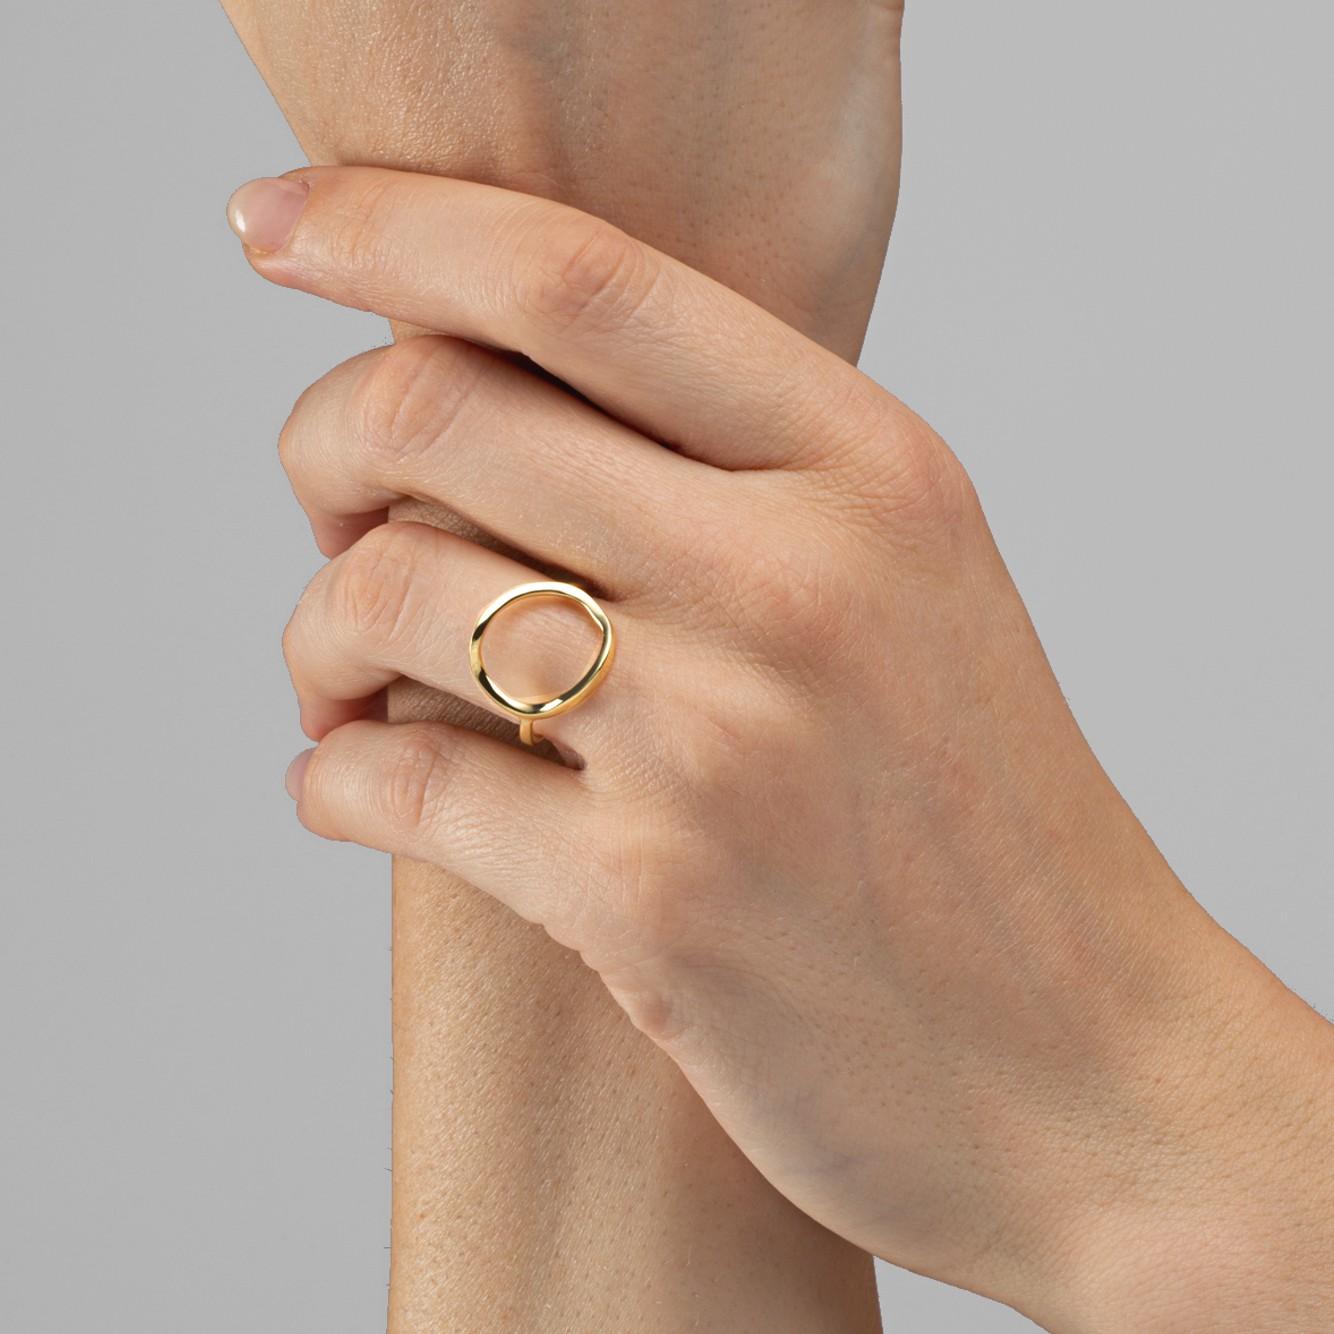 Alex Jona design collection, hand crafted in Italy, open circle hoop ring in 18 karat yellow gold. Ring size 6, can be sized.
Alex Jona jewels stand out, not only for their special design and for the excellent quality of the gemstones, but also for